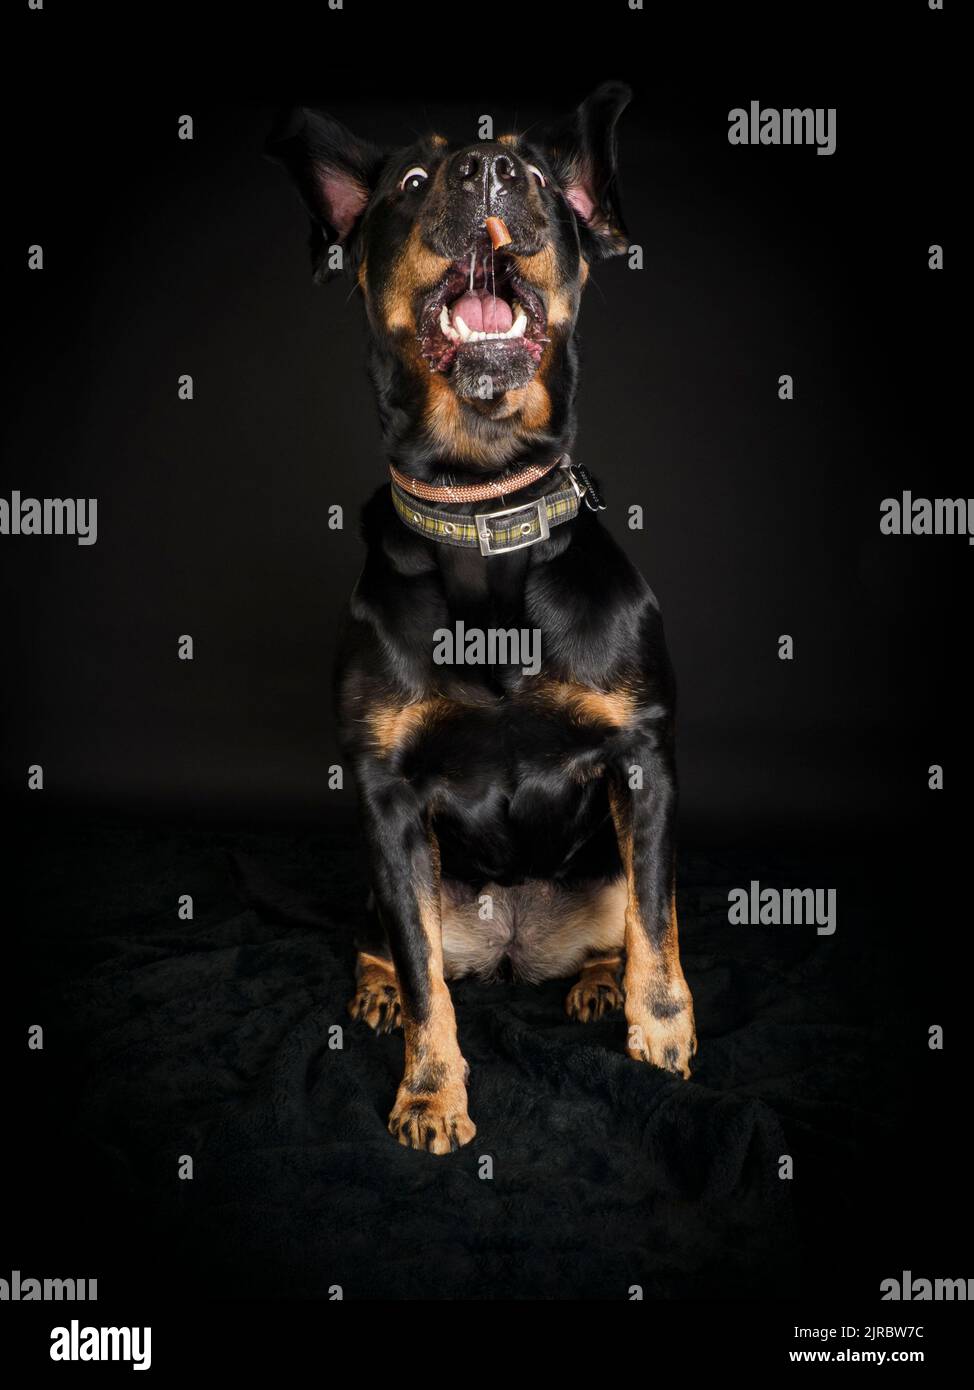 Studio portrait of a Rottweiler catching a treat. Stock Photo